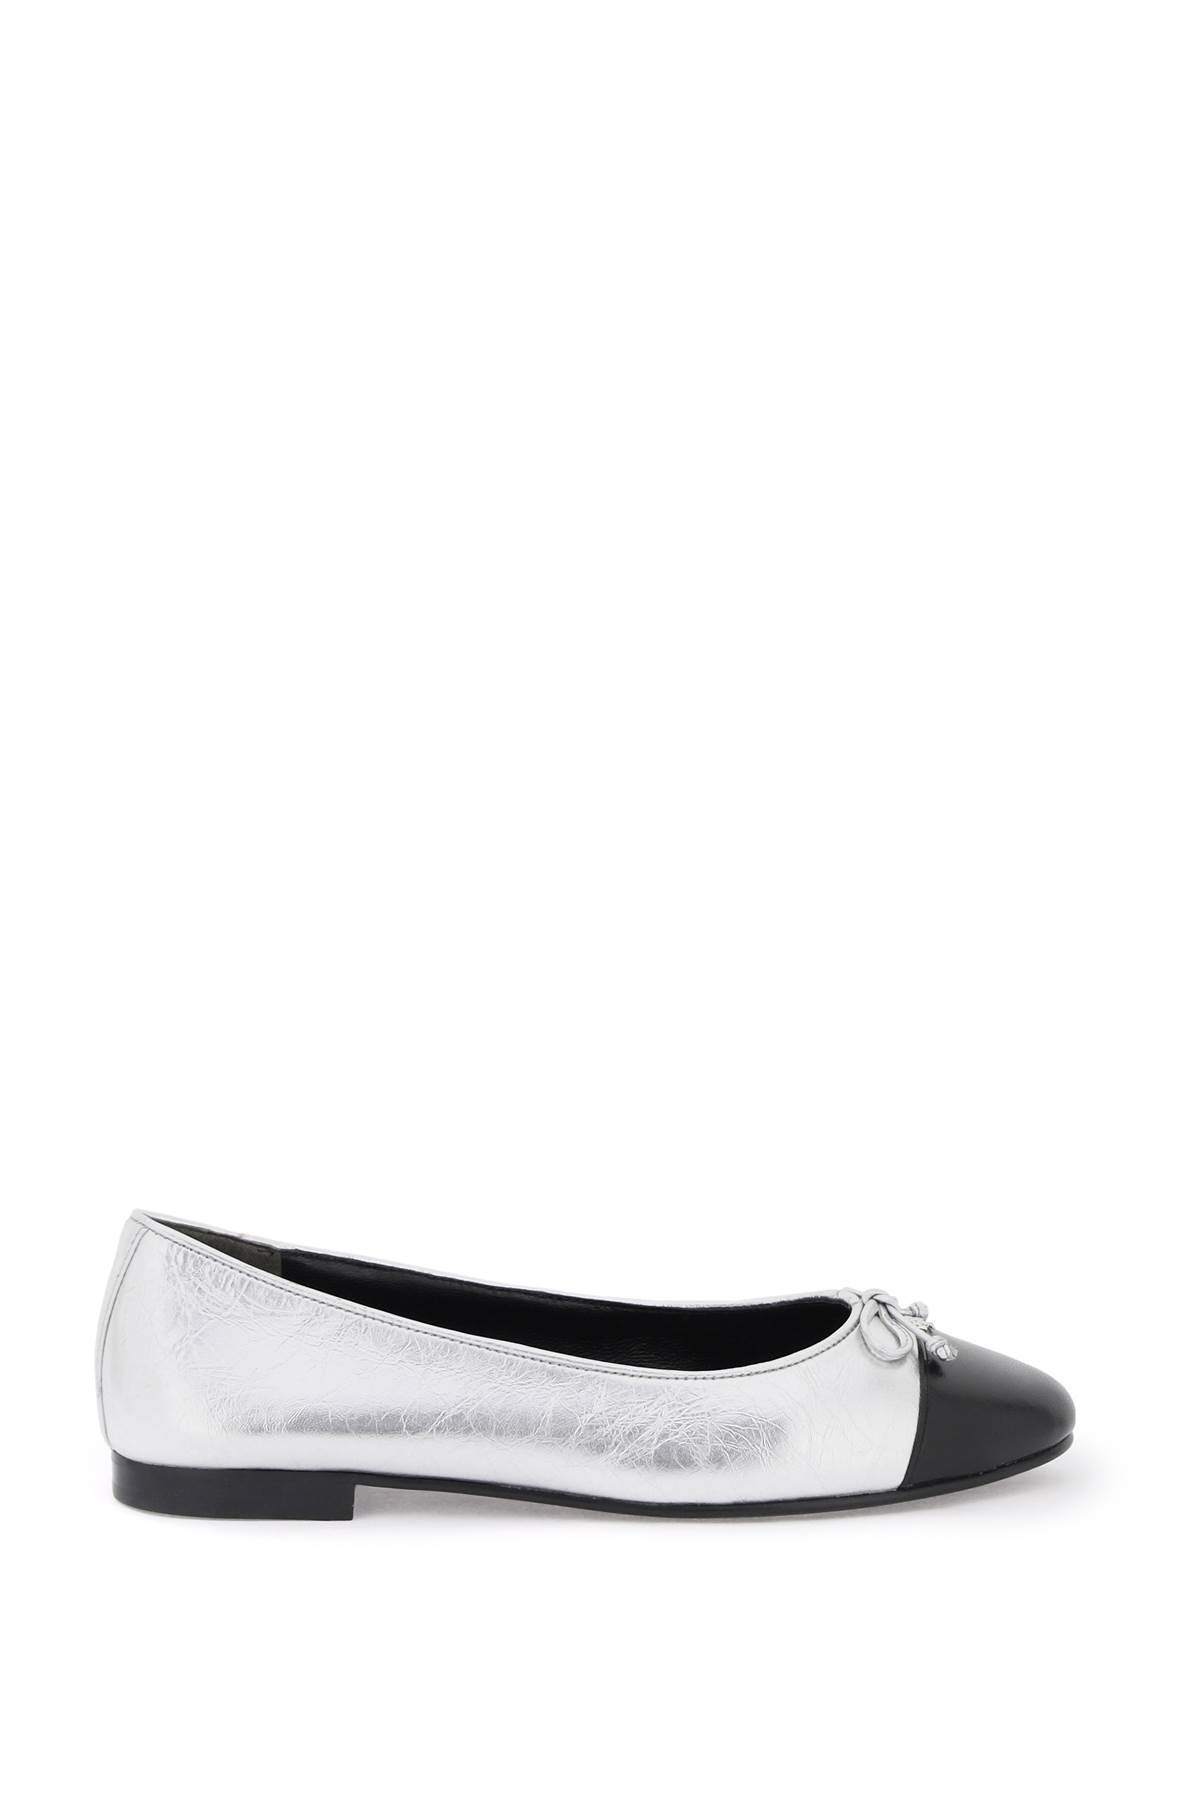 TORY BURCH laminated ballet flats with contrasting toe